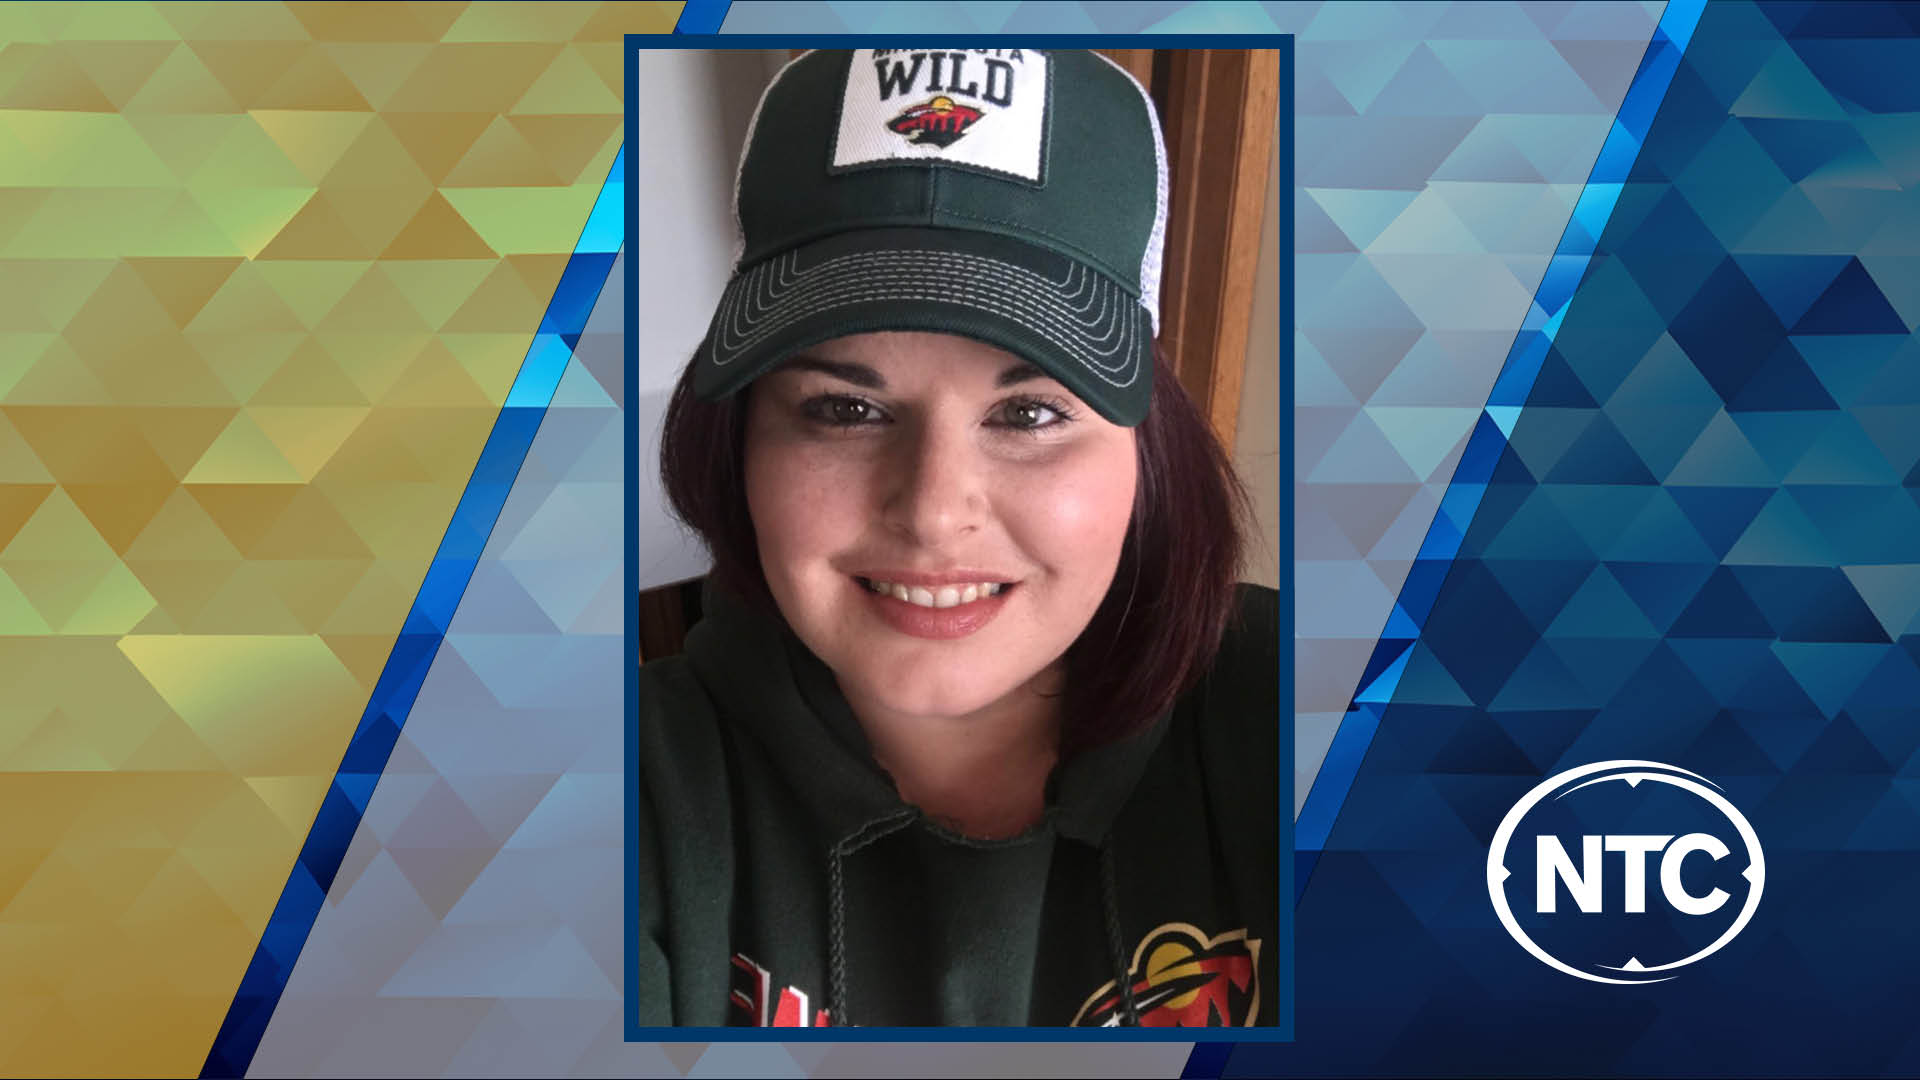 A portrait of a woman with long brown hair wearing a Minnesota Wild jacket and cap.